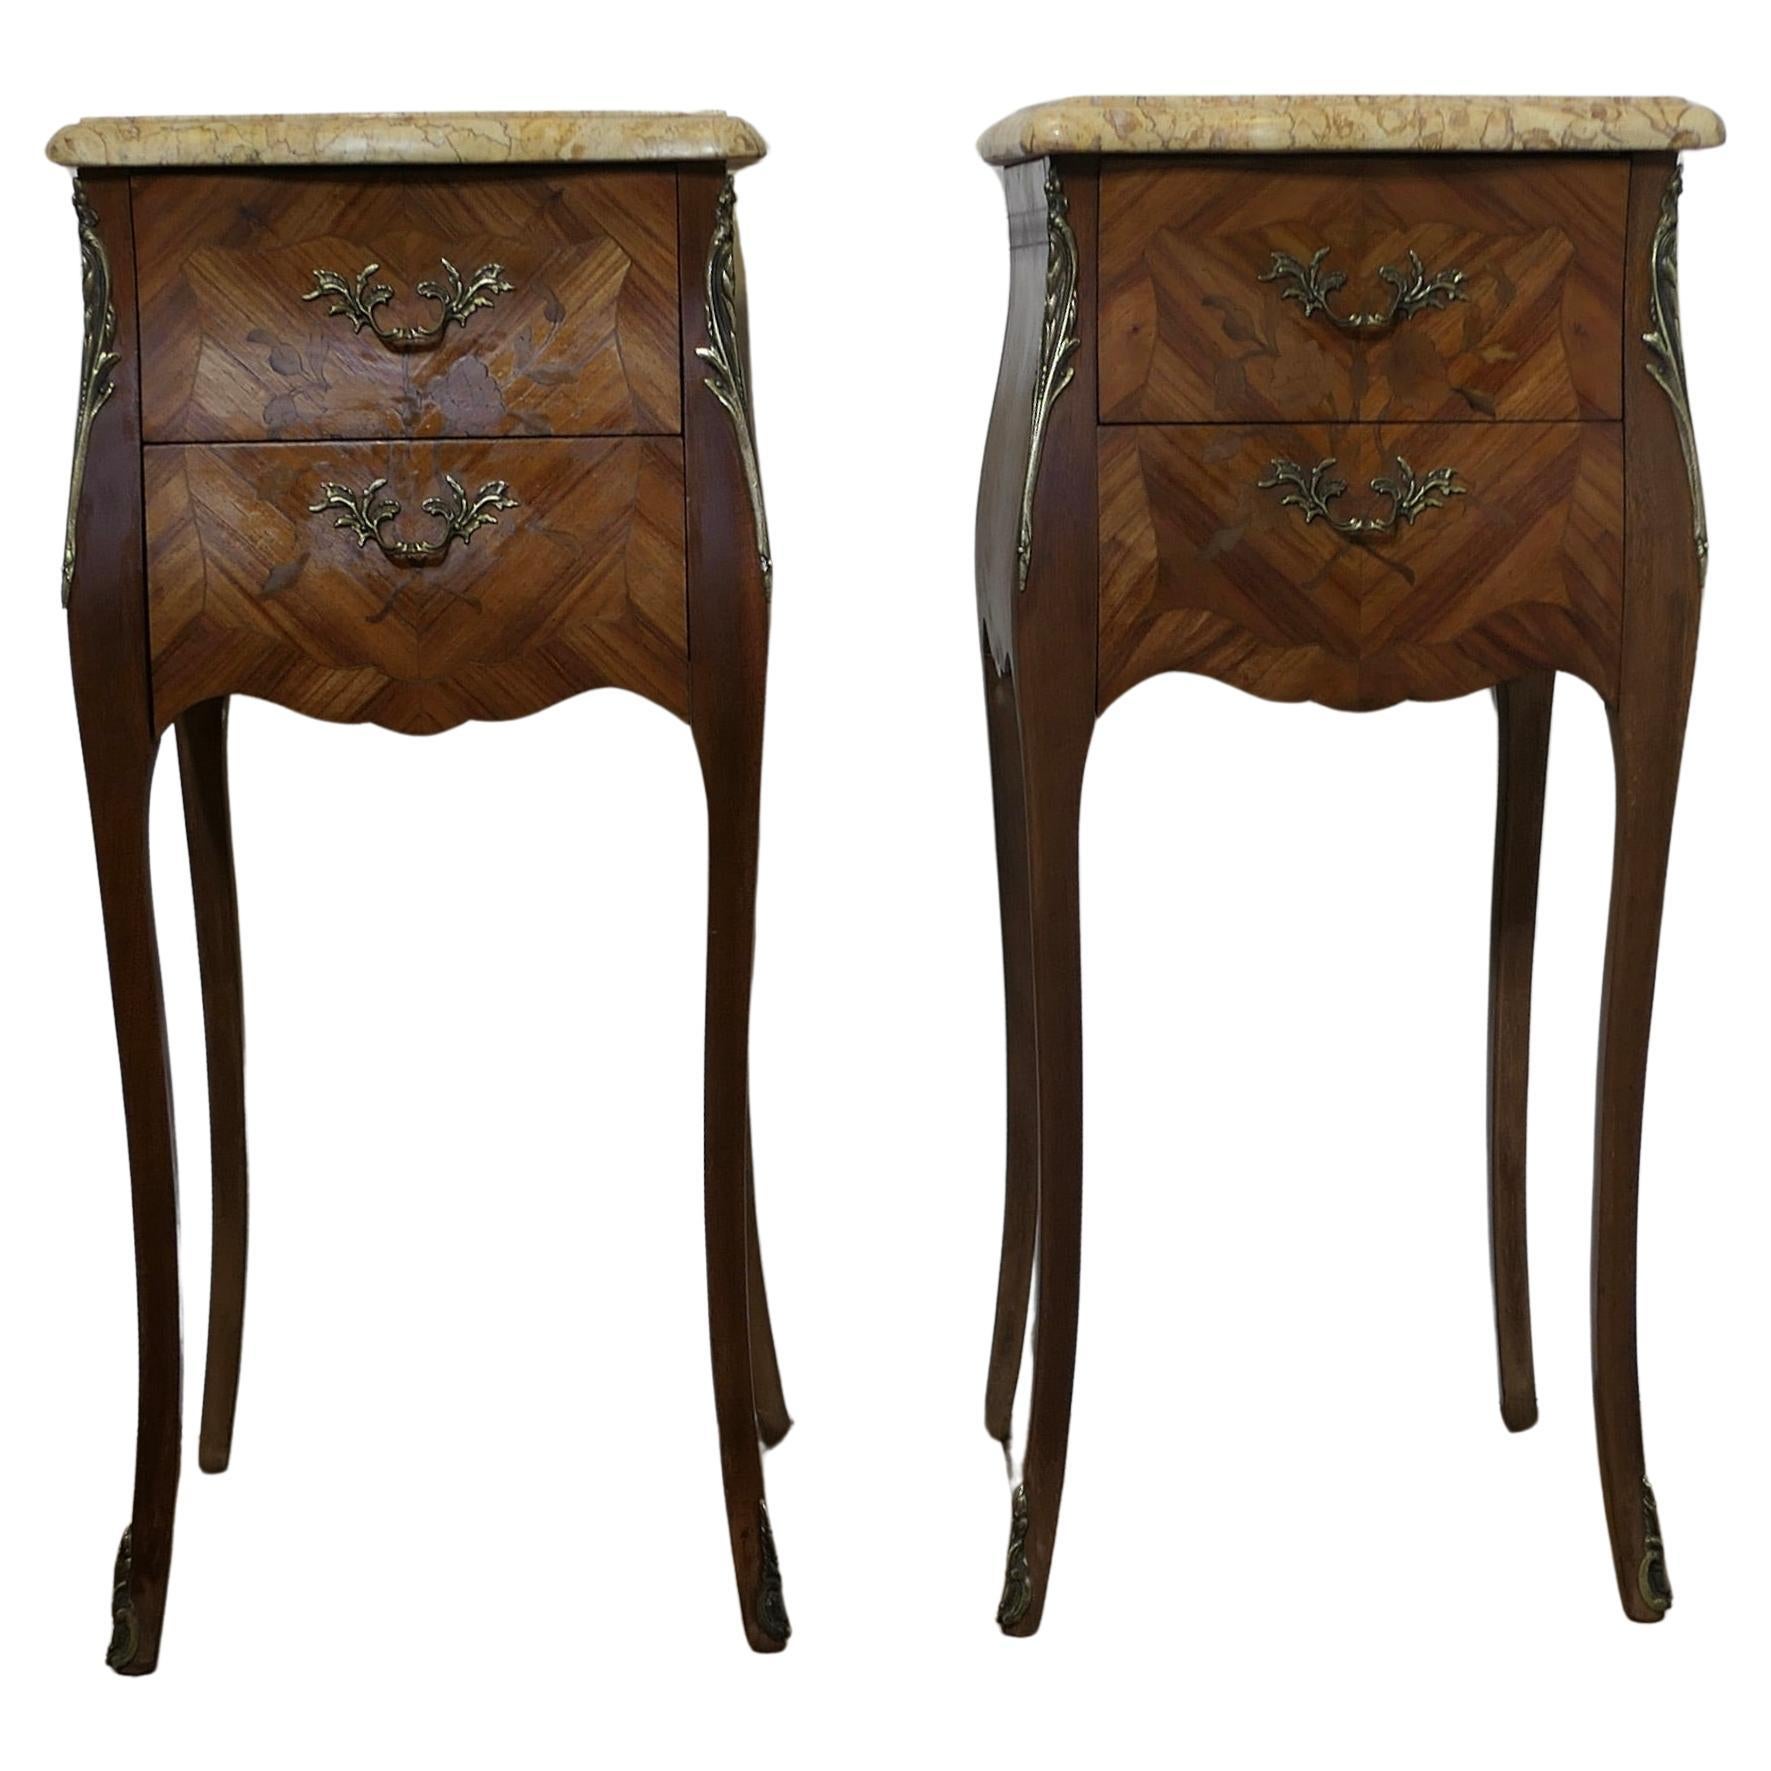 A Pair of French Marquetry Bombe Bedside Cabinets   